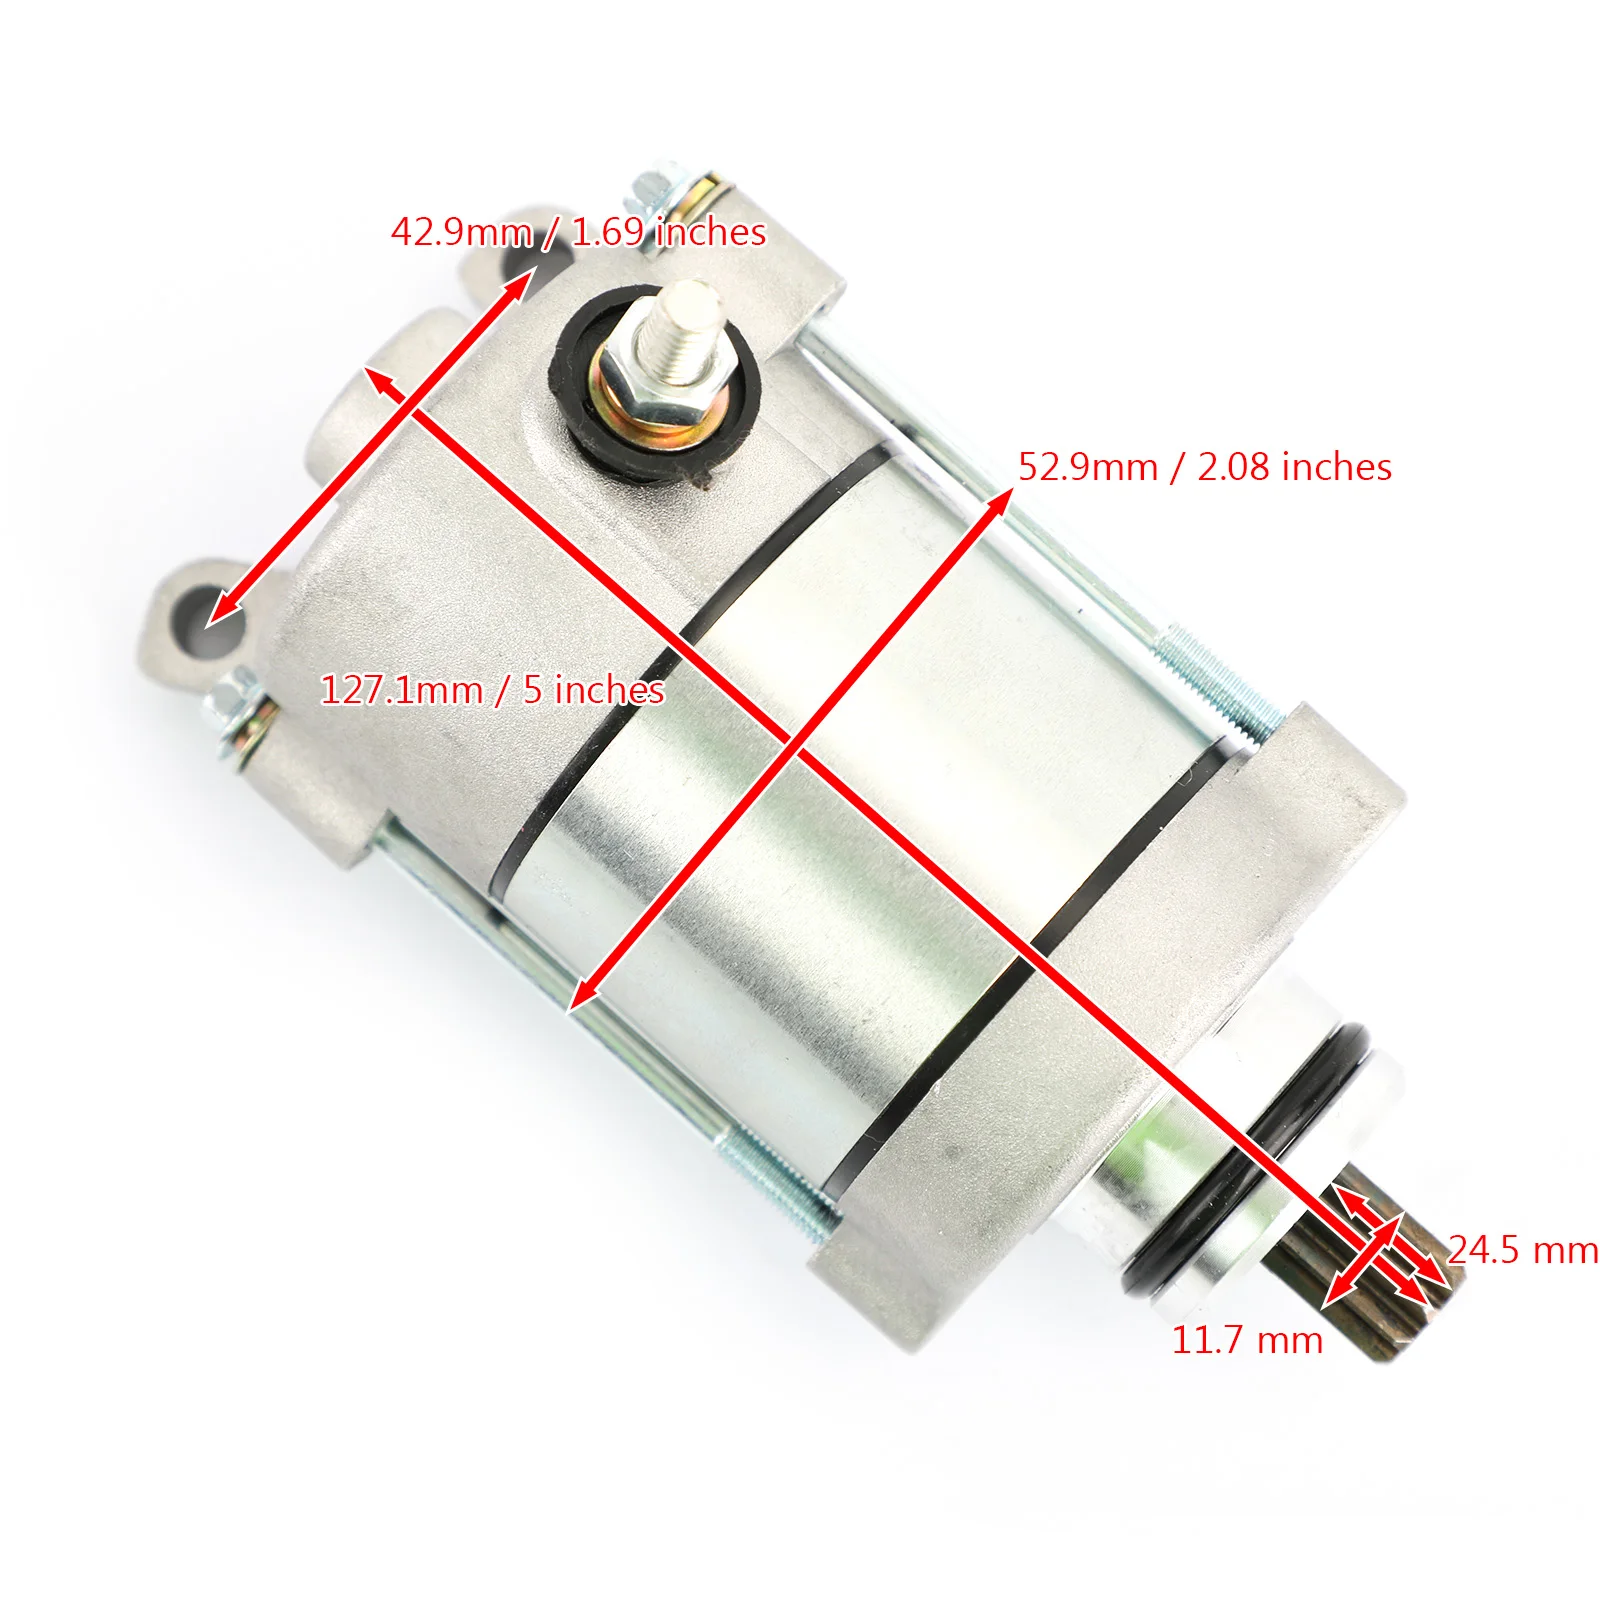 Artudatech Starter Motor Starting Fit for Honda CRF450 CRF 450 X 2005 - 2018 31200-MEY-671 Motorcycle Accessories Parts